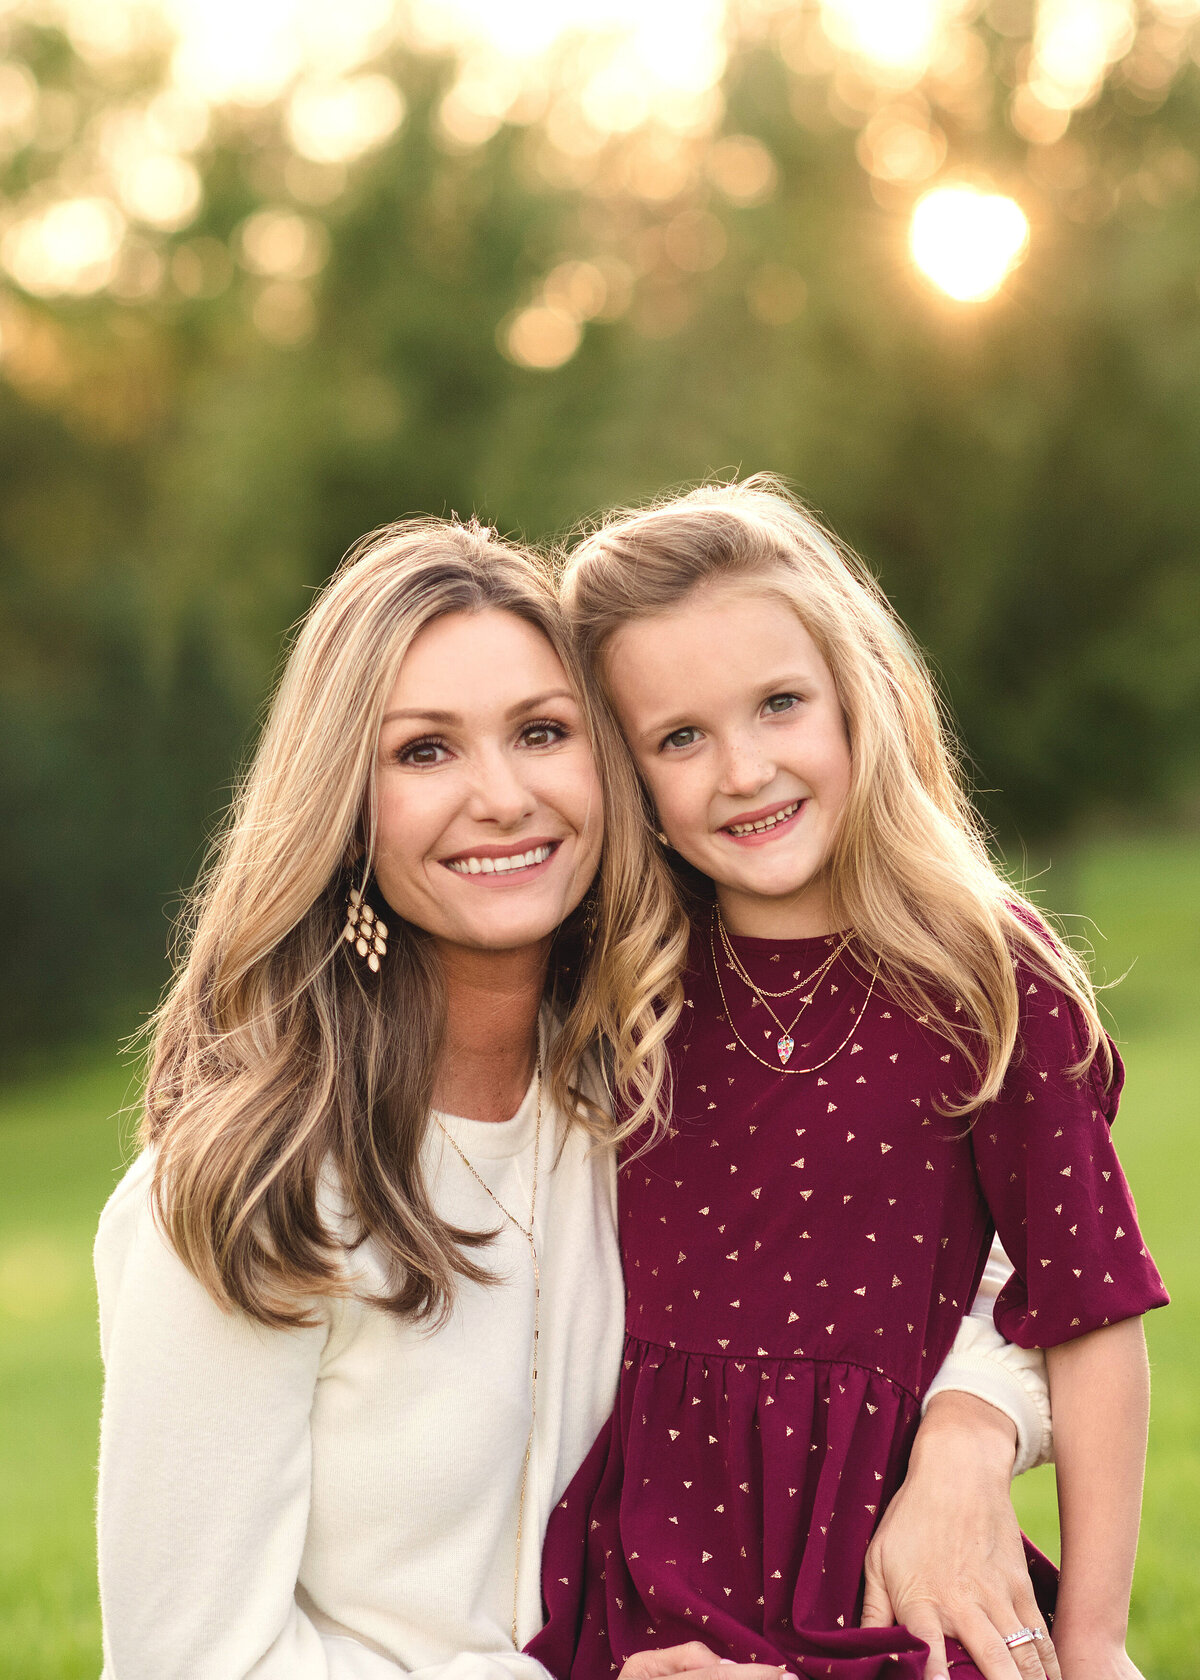 Des-Moines-Iowa-Family-Photographer-Theresa-Schumacher-Photography-Fall-Mom-Daughter-Golden-Hour